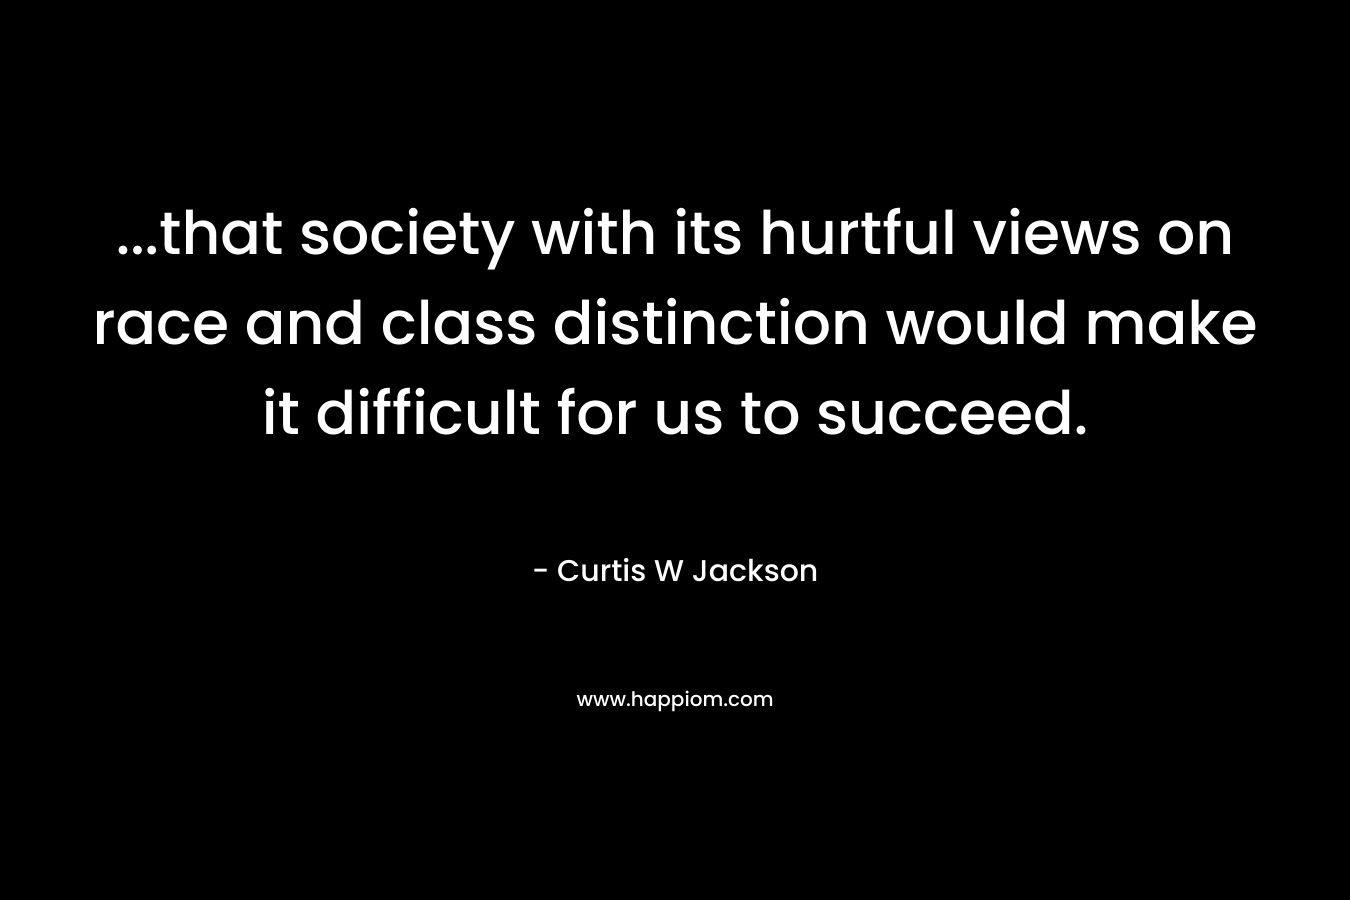 ...that society with its hurtful views on race and class distinction would make it difficult for us to succeed.